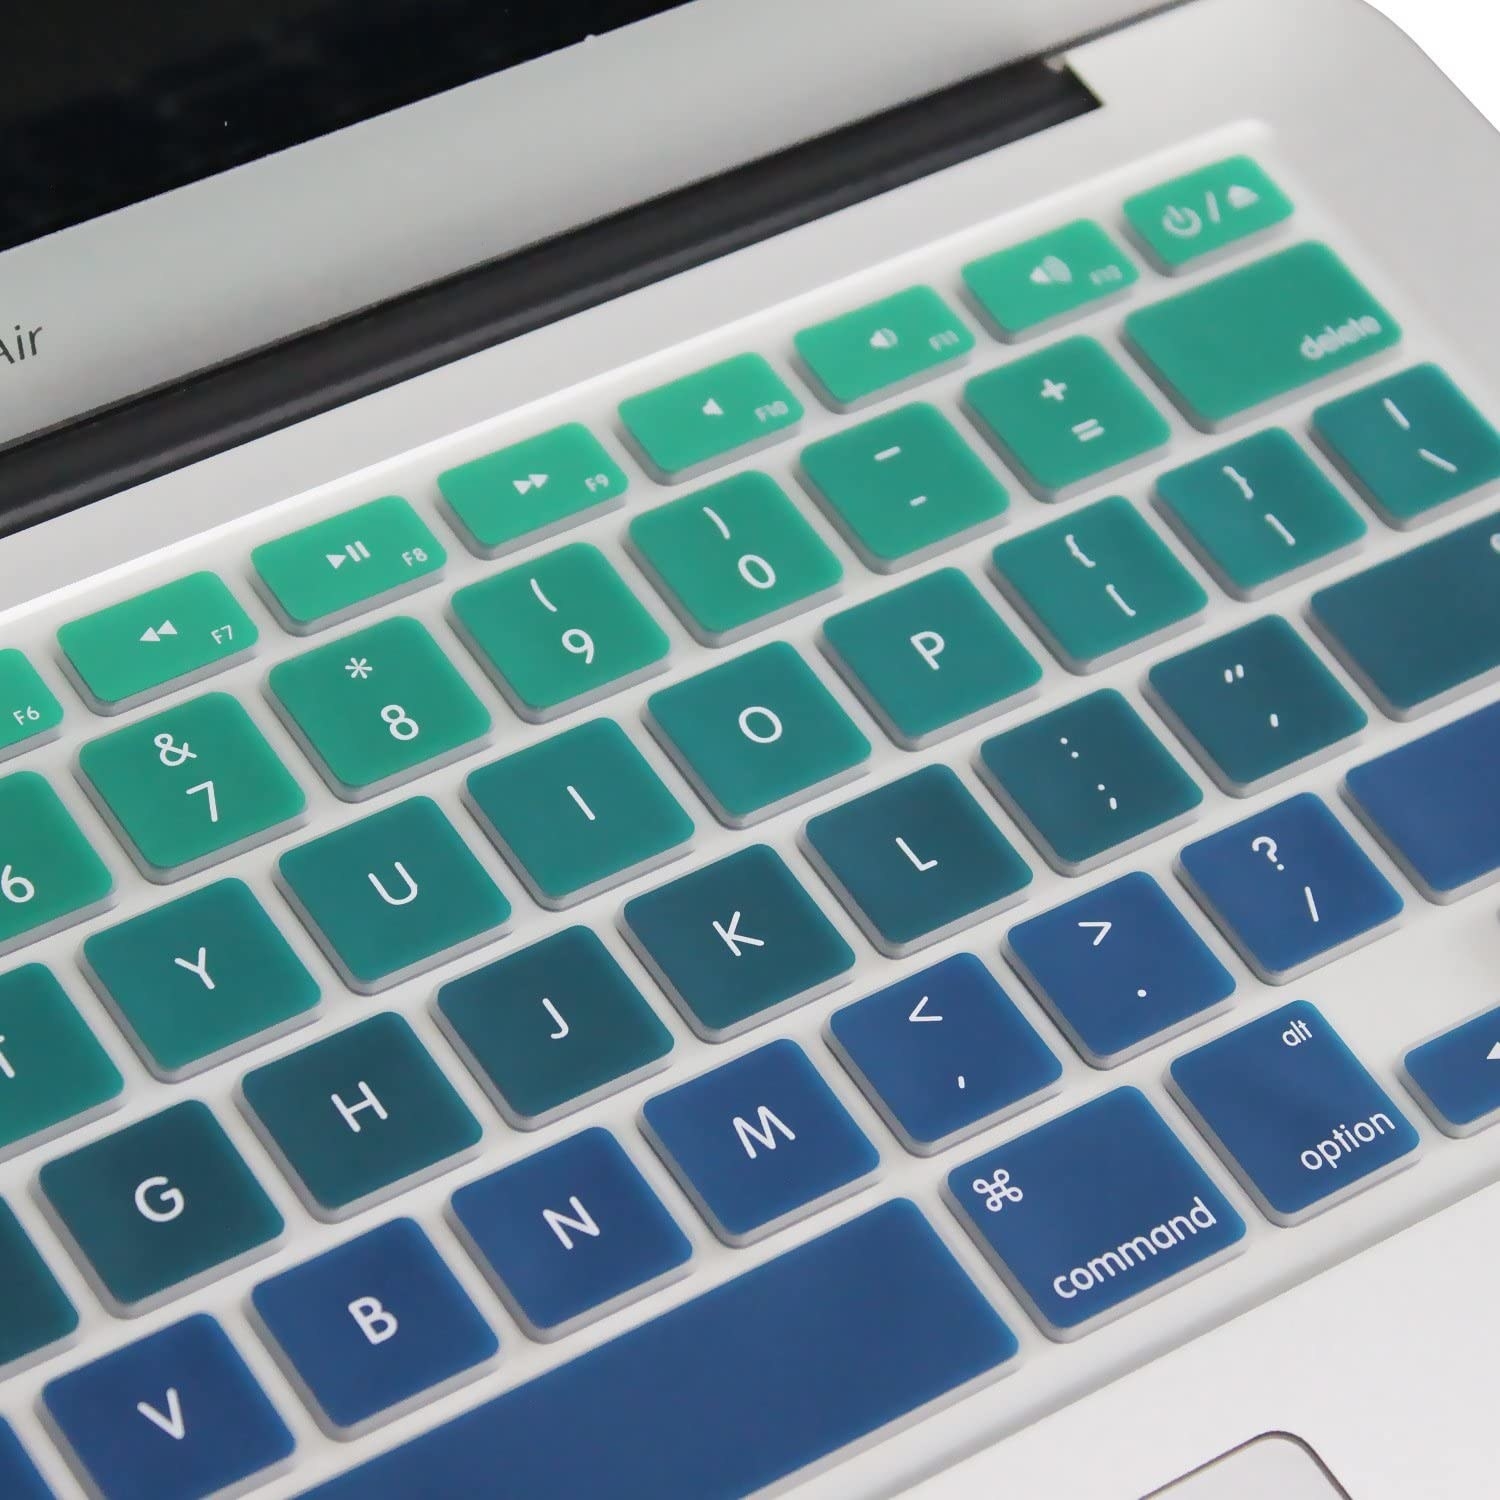 laptop keyboard with colorful key covers